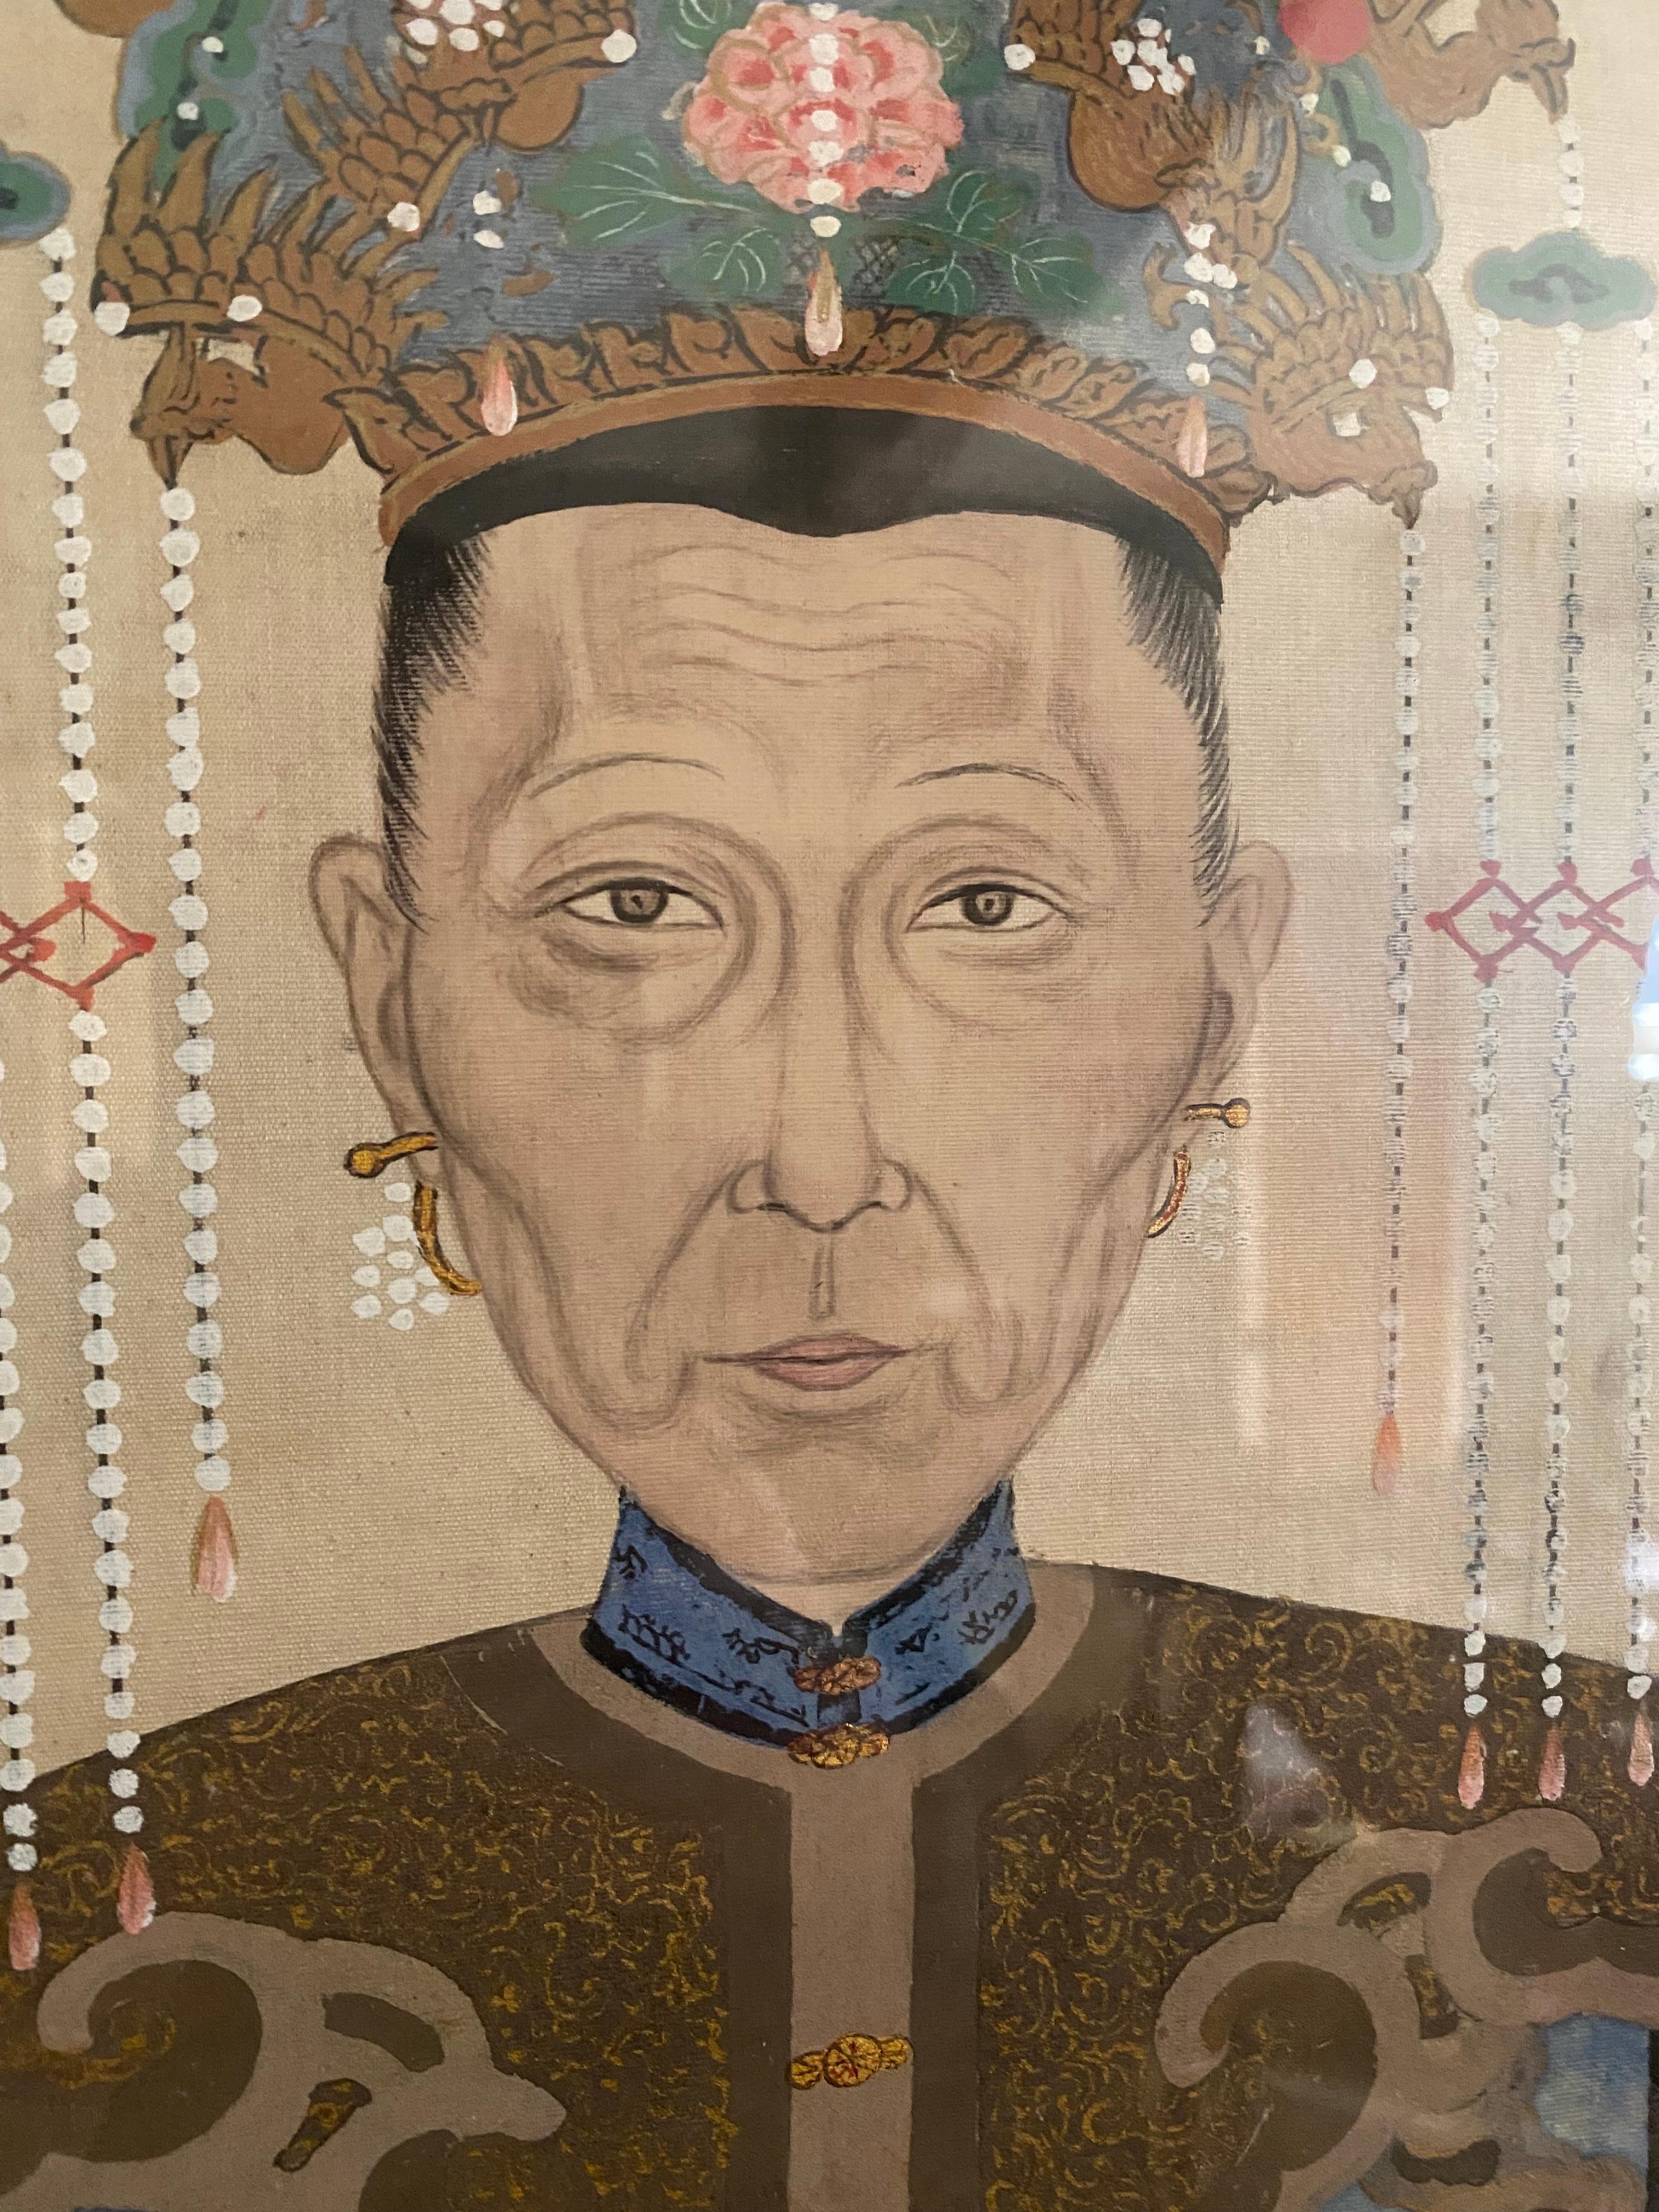 A very fine example of a late 19th / early 20th century Chinese ancestral portrait on silk. 

The colours are extremely strong and vibrant with wonderful detailing to the face and costume. Unfortunately there appears to be some water damage or